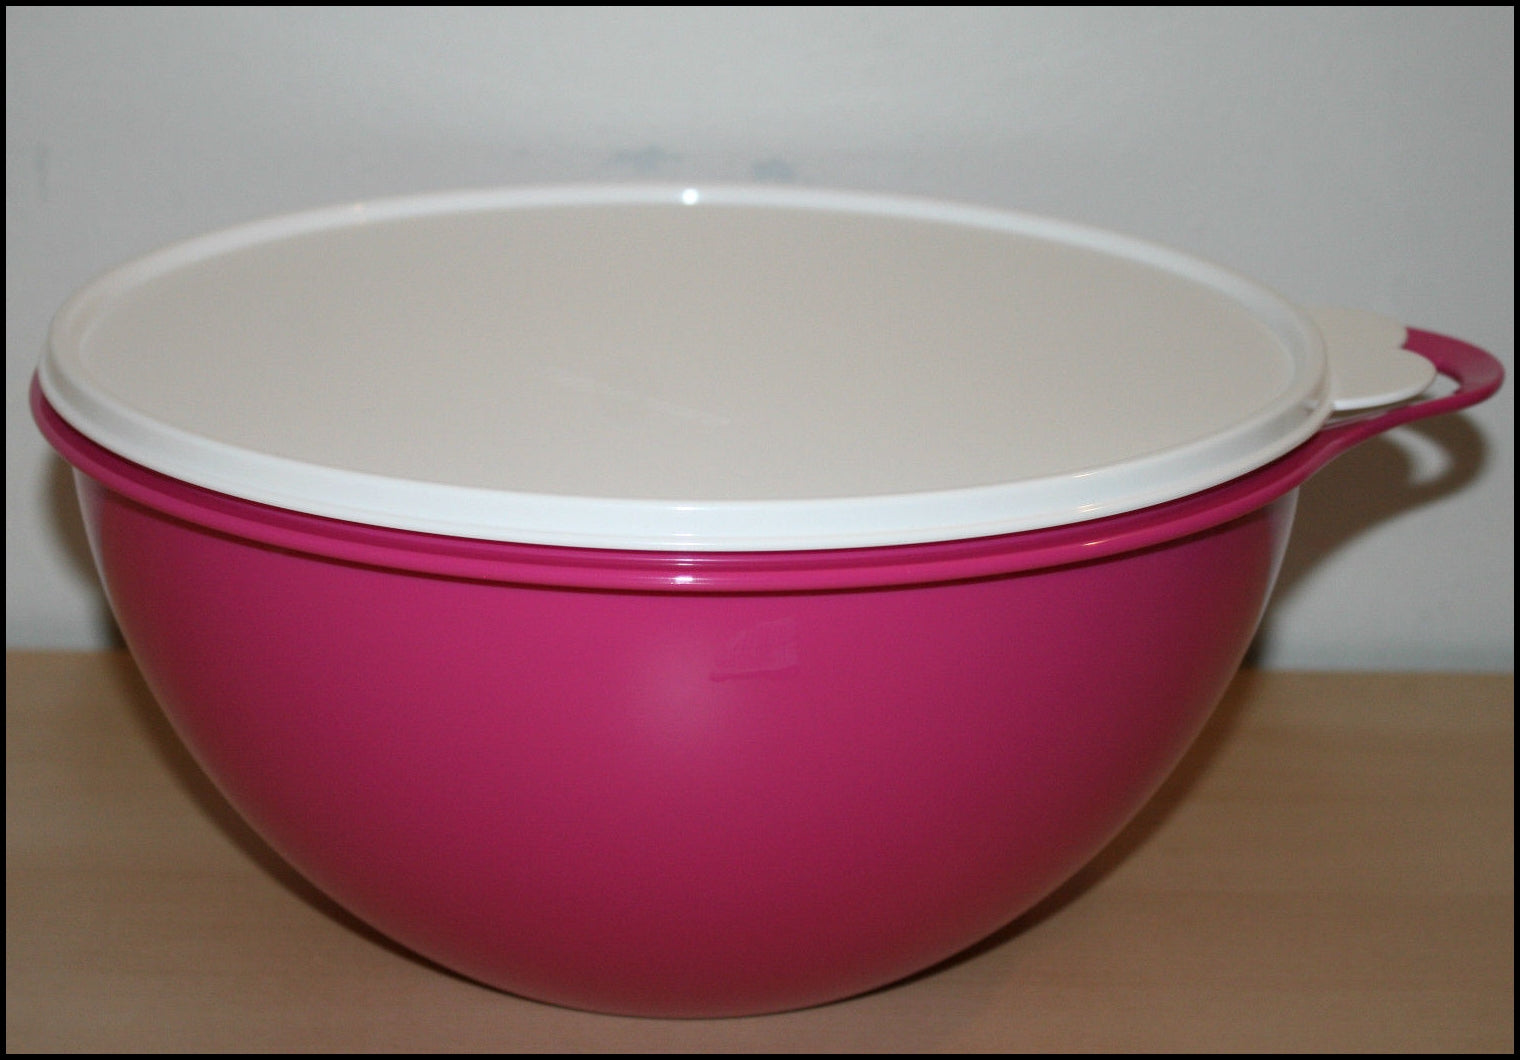 TUPPERWARE 19-C THATS A BOWL MEDIUM CONFIDENT PINK WHITE TABBED SEAL